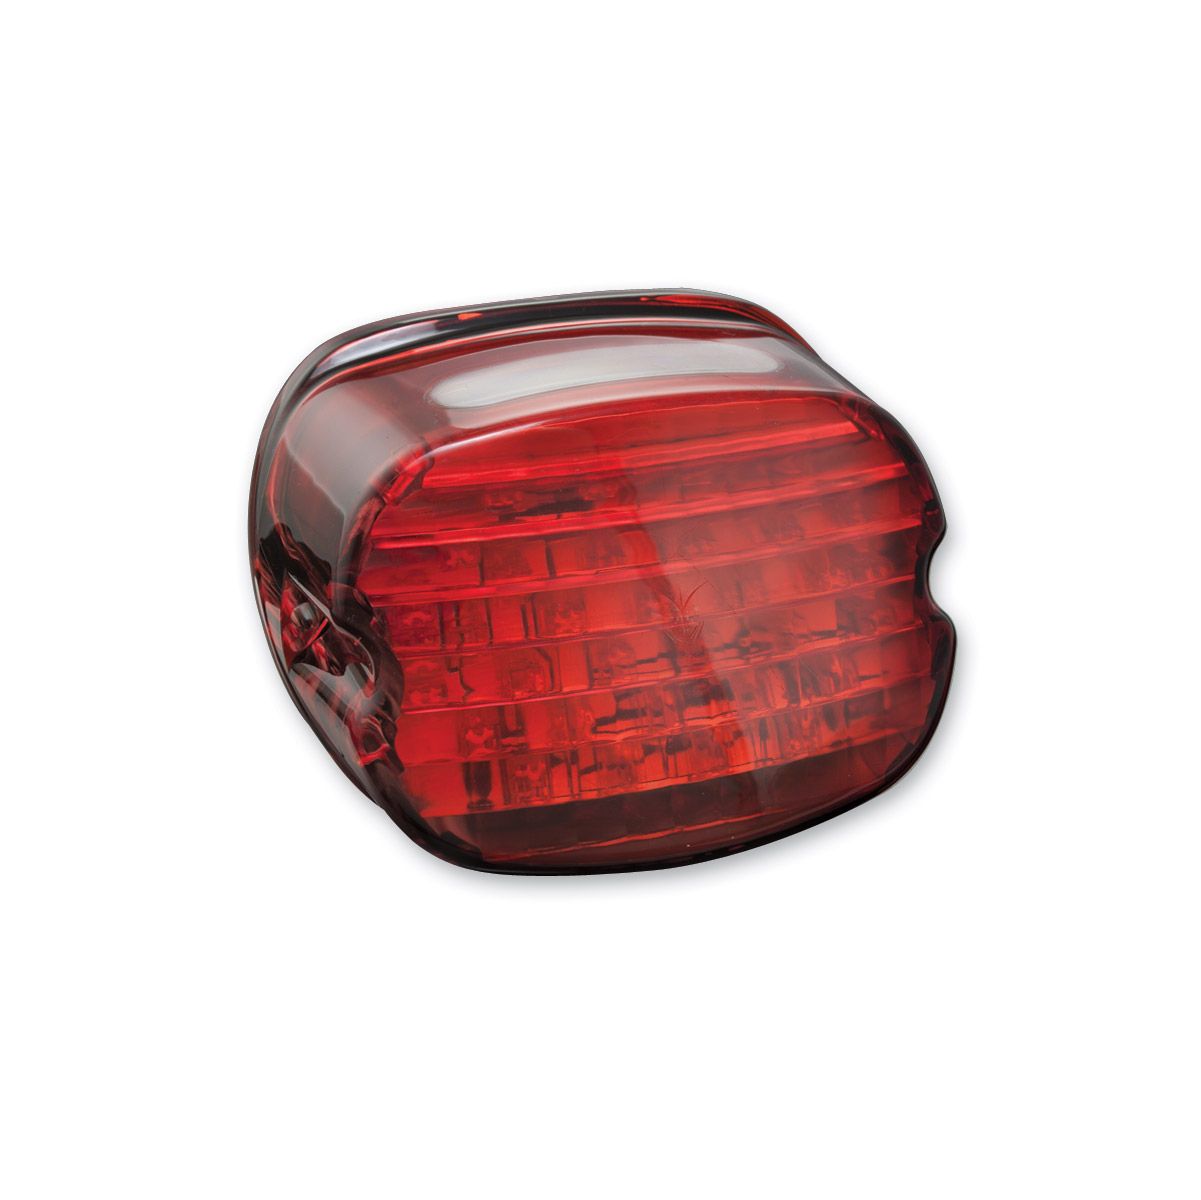 Kuryakyn LED Red Low Profile ECE Compliant Taillight without Plate Light